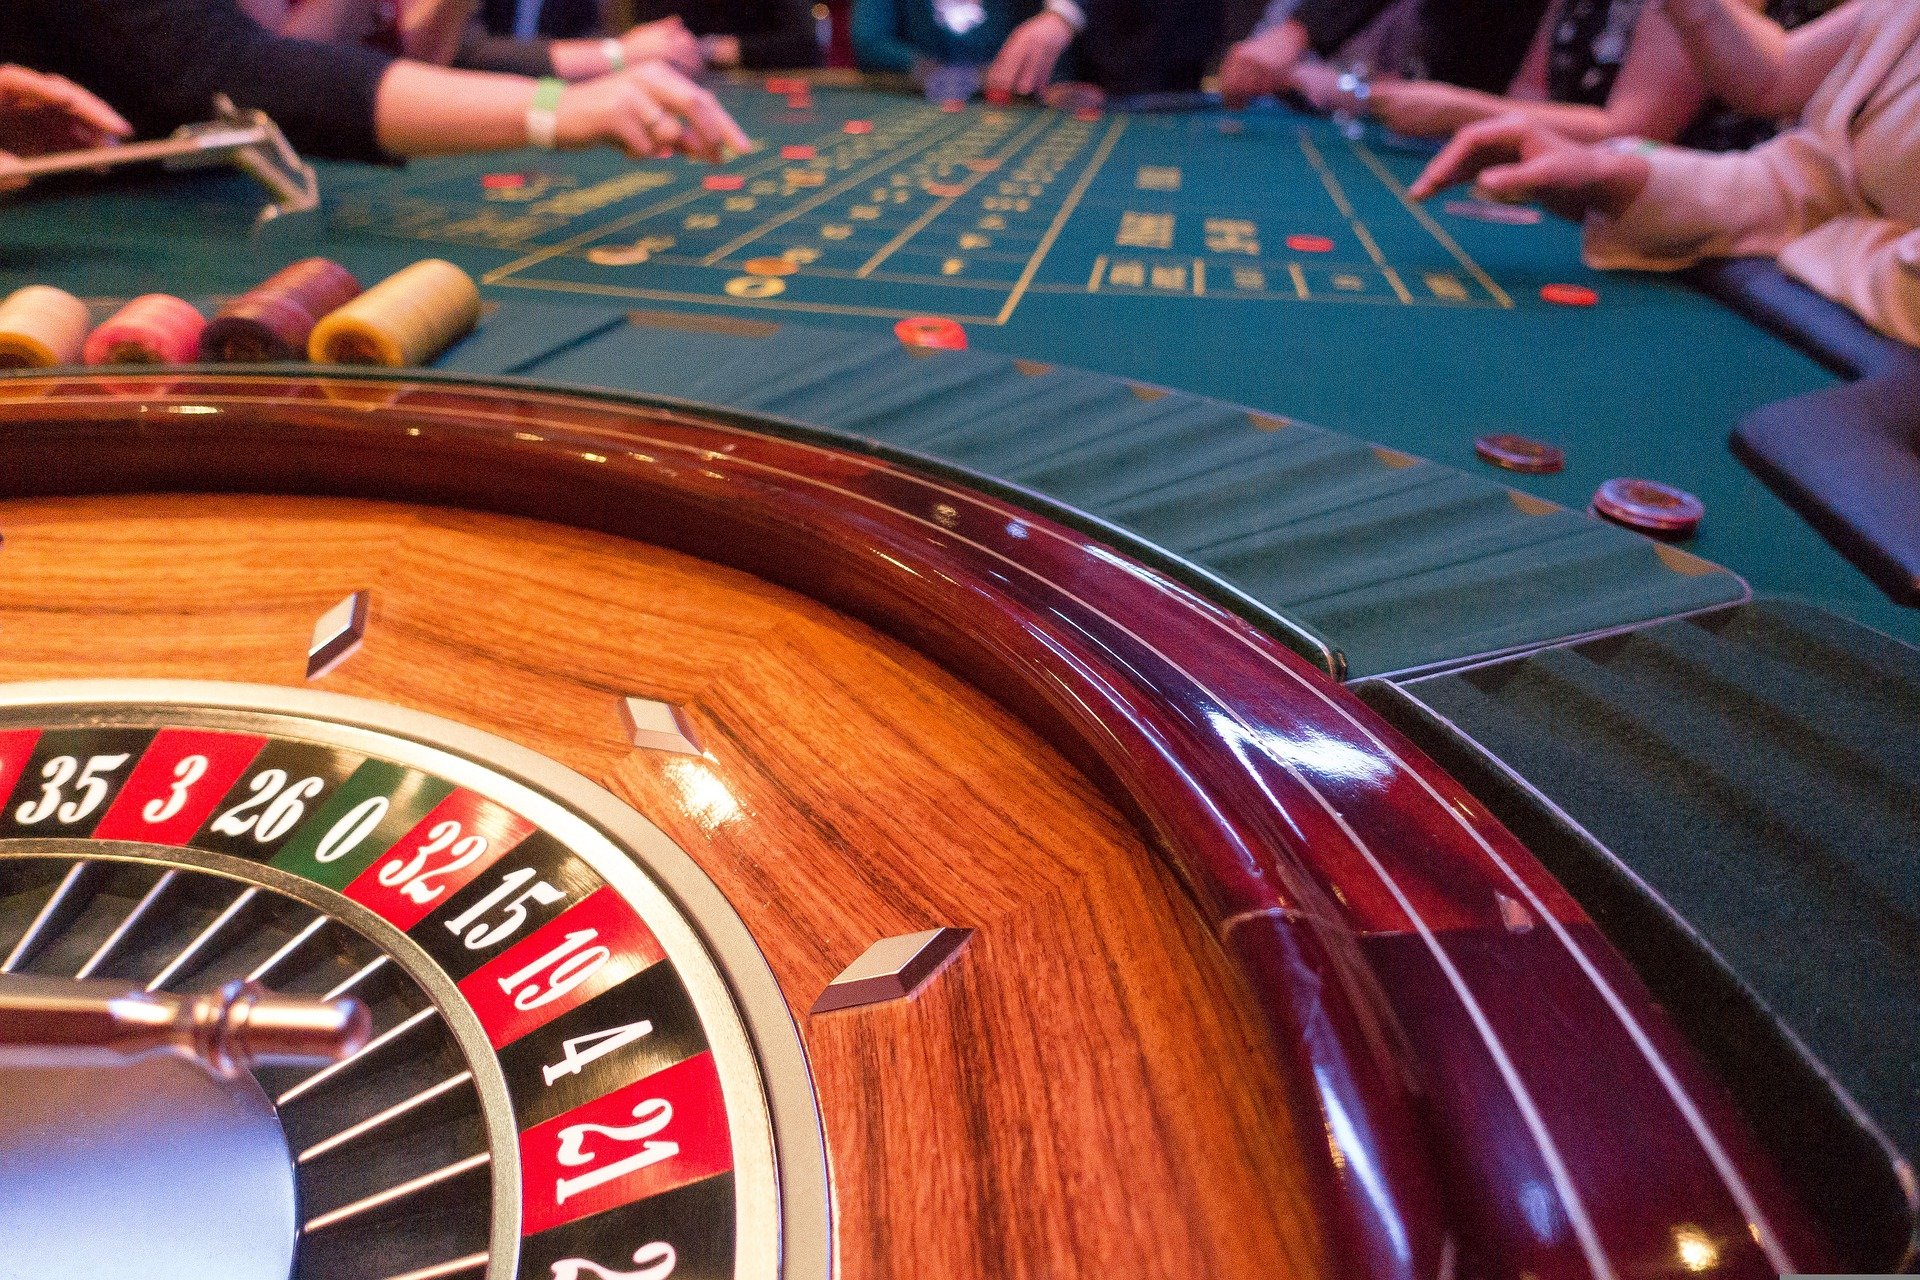 What are the gambling habits of Indian casino players?